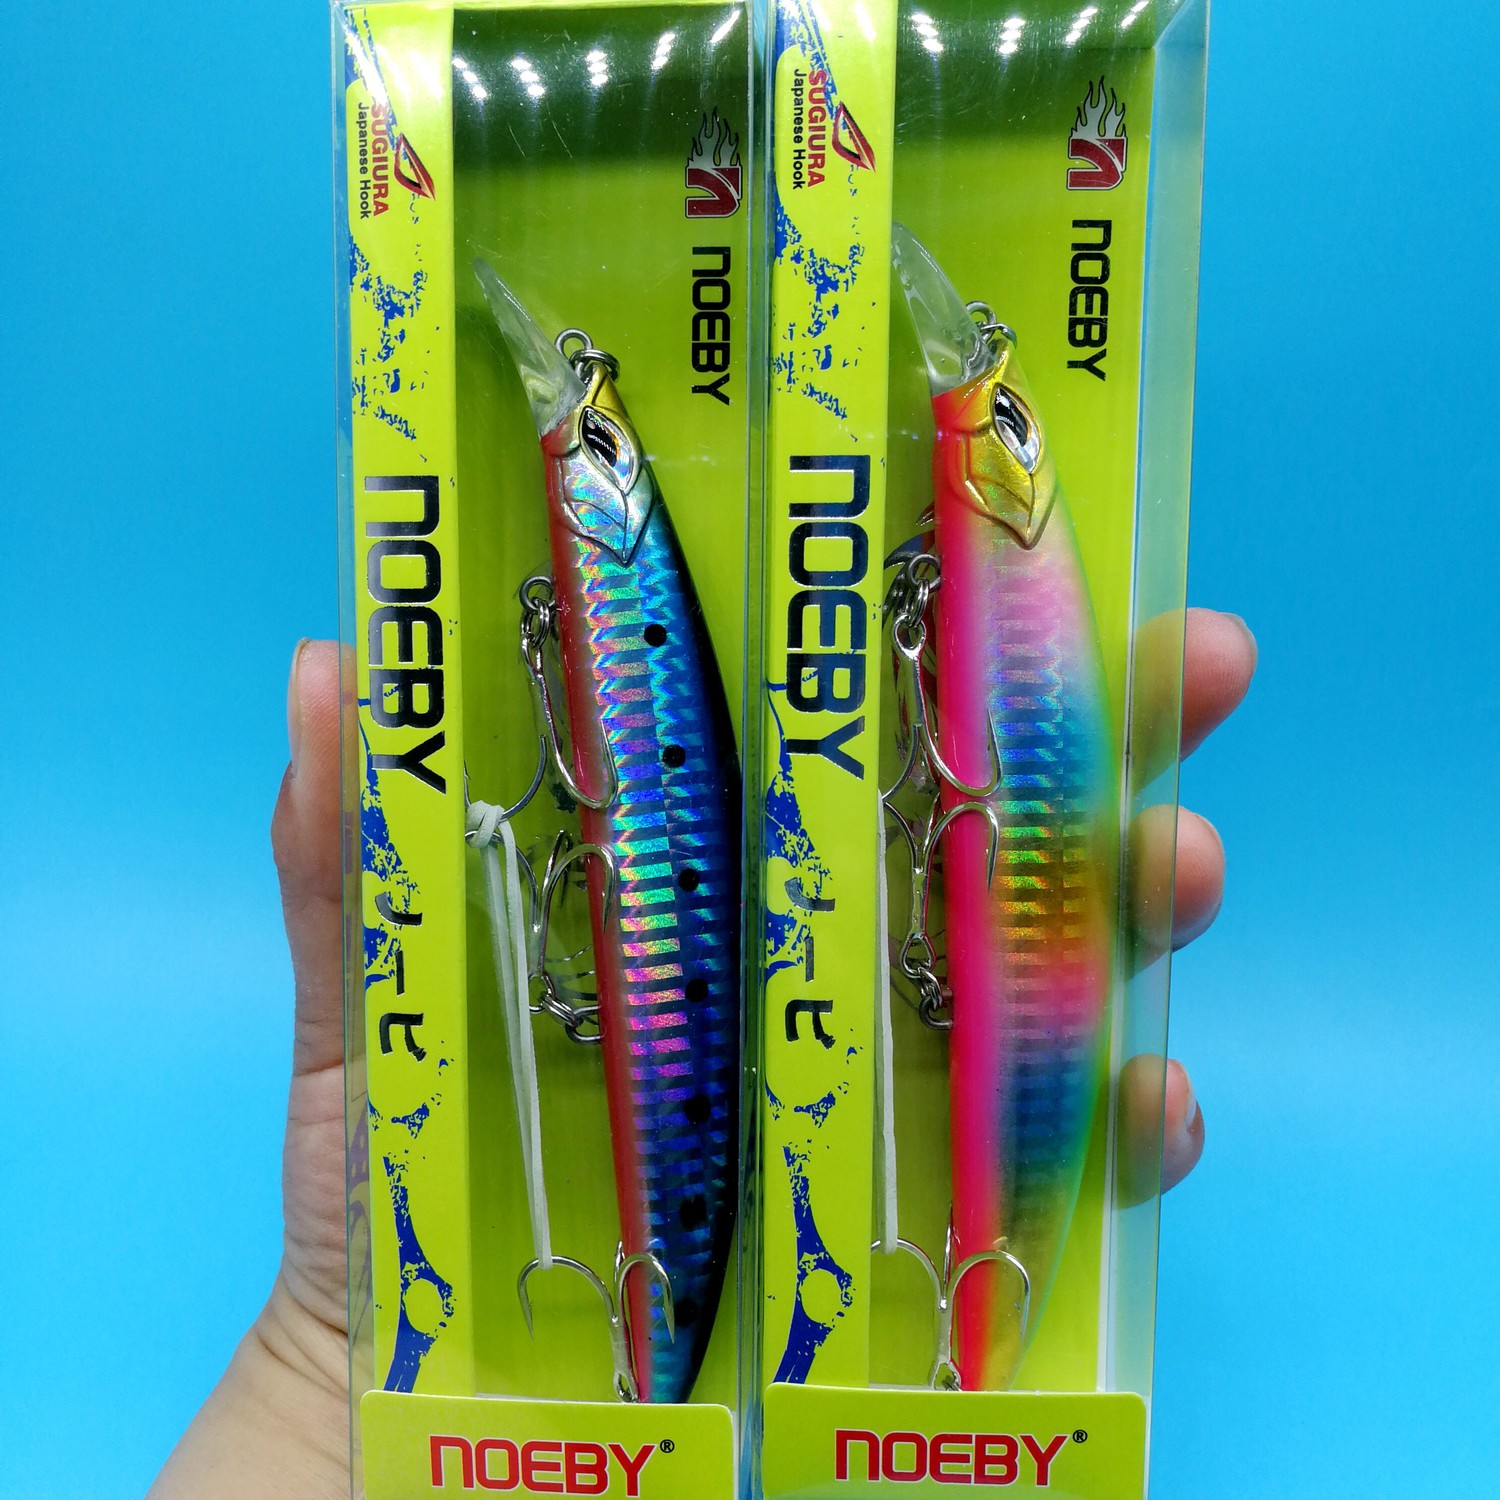 NOEBY 2 Pieces 2019 NEW Floating Minnow Fishing Lure 23g/130mm 4colors Depth 0-1.5m Wobbler Hard Bait Saltwater Fishing Tackle T200602 от DHgate WW